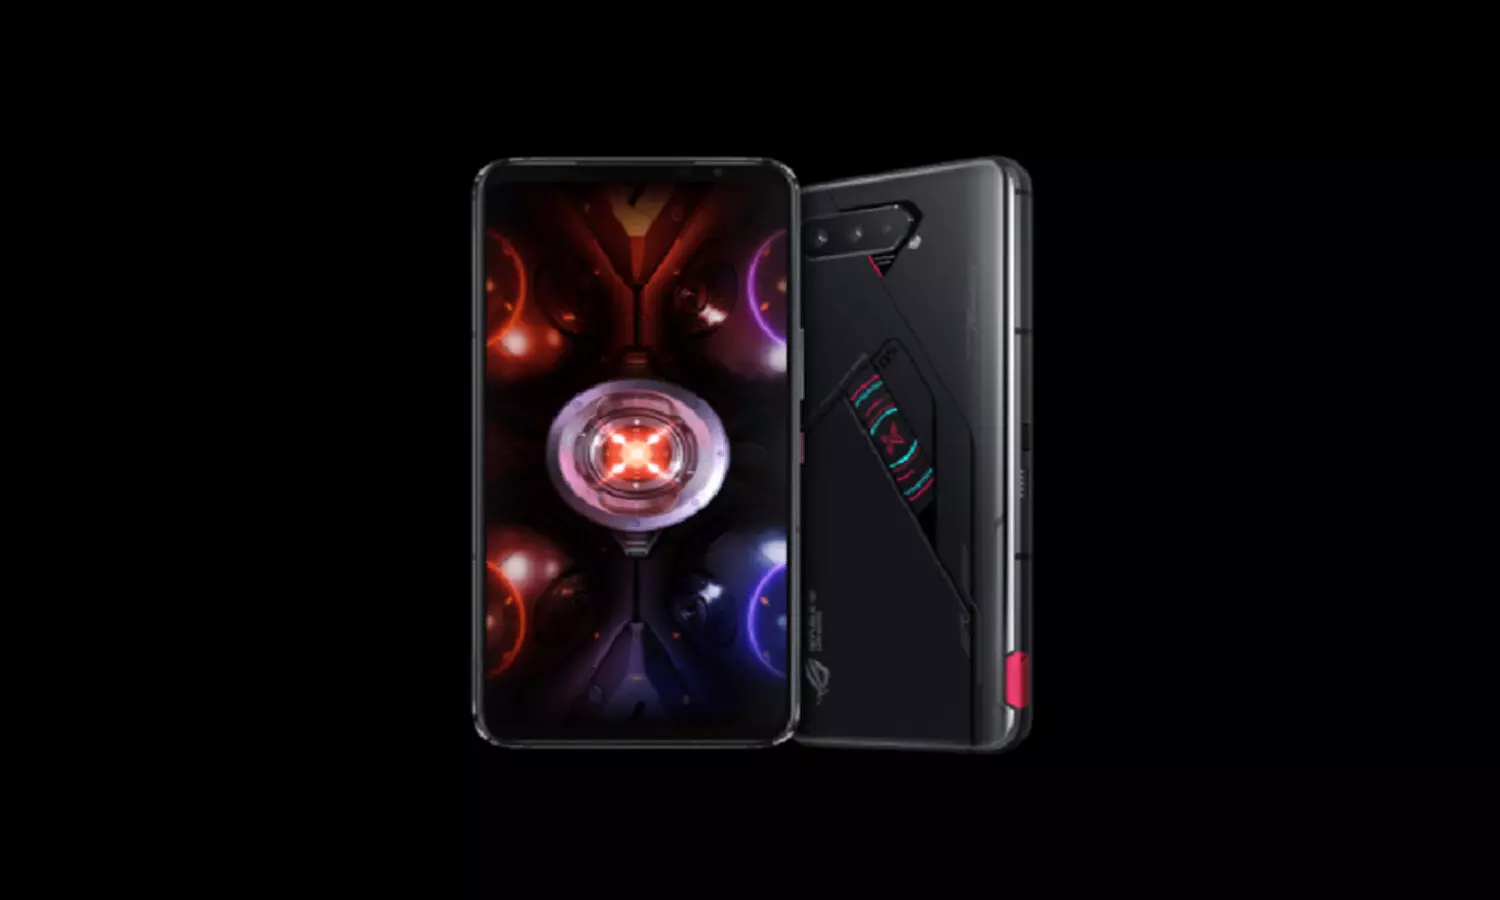 ASUS ROG Phone 5G Pro Smartphone launched; Check Specifications!